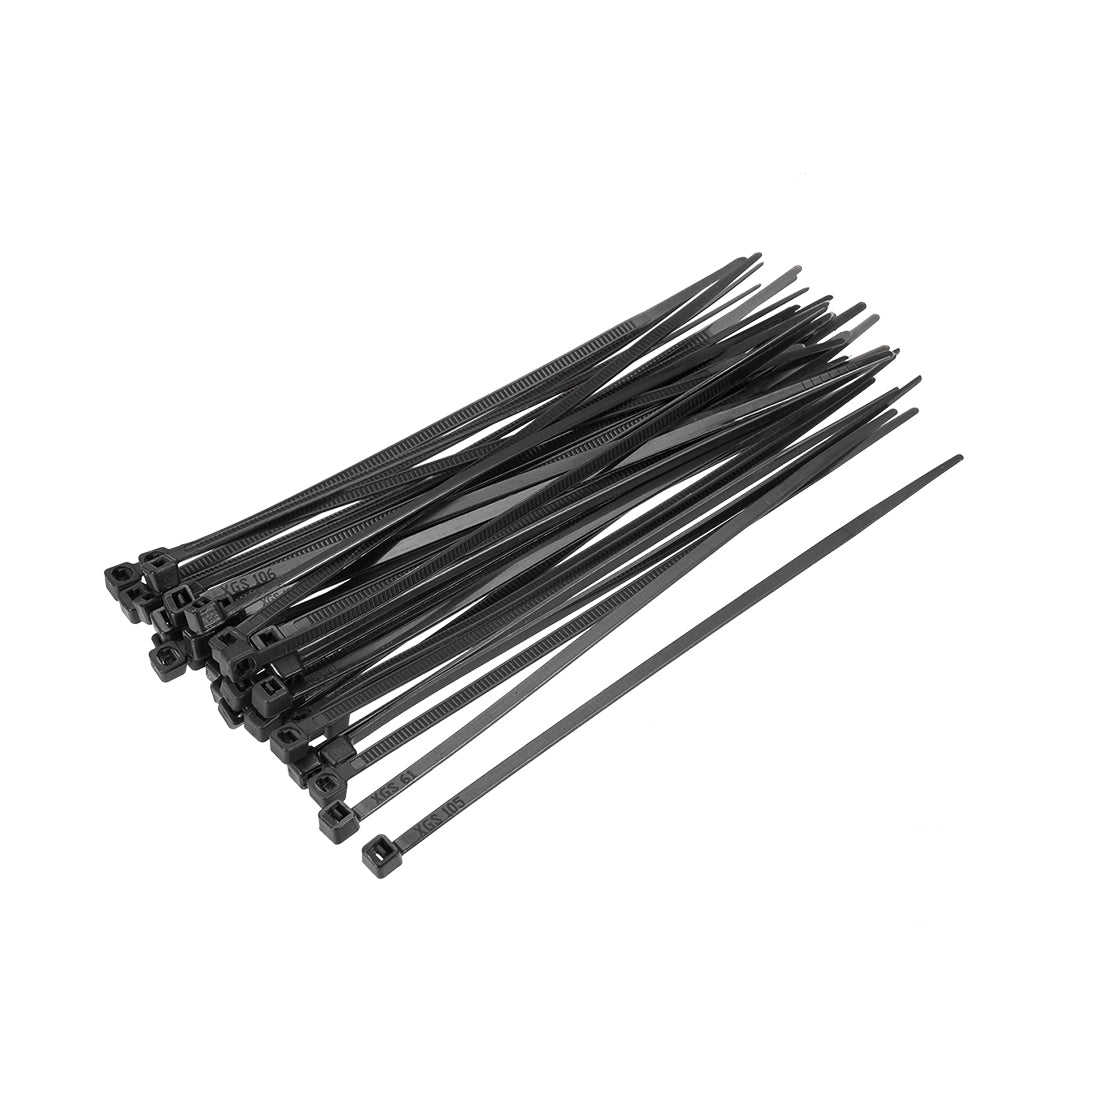 uxcell Uxcell Cable Zip Ties 120mmx3.2mm Self-Locking Nylon Tie Wraps Black 500pcs